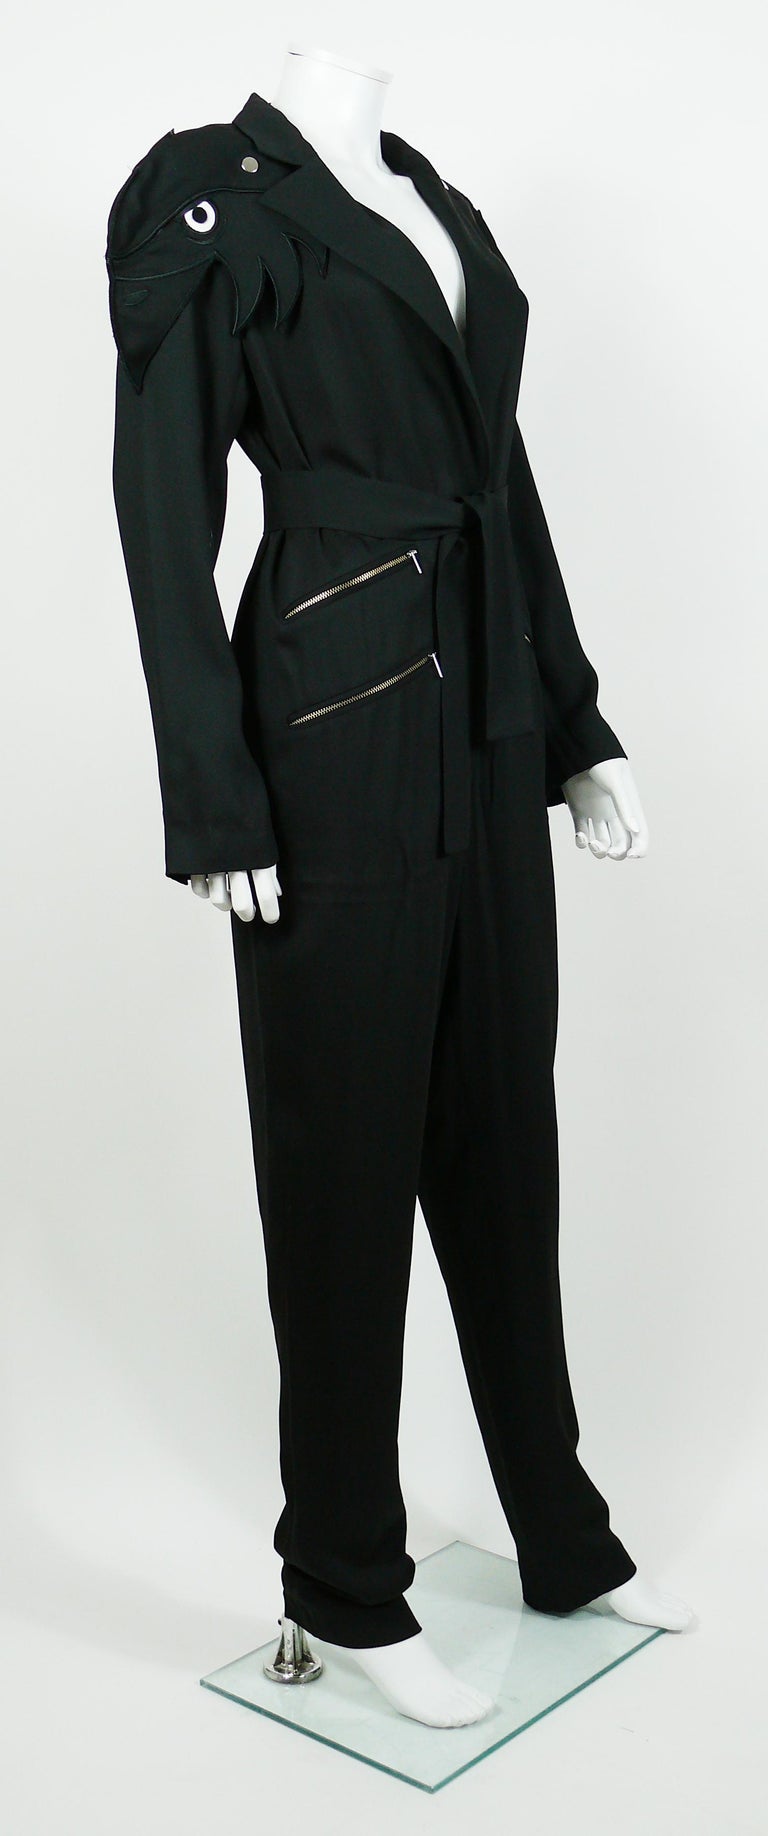 JEAN CHARLES DE CASTELBAJAC bird caps sleeves black jumpsuit.

Fall/Winter 2012 Collection.

This jumsuit features :
- Plunge neckline.
- Removable novelty bird sleeve caps - could be worn with or without (see photo 9).
- Three zippered pockets.
-